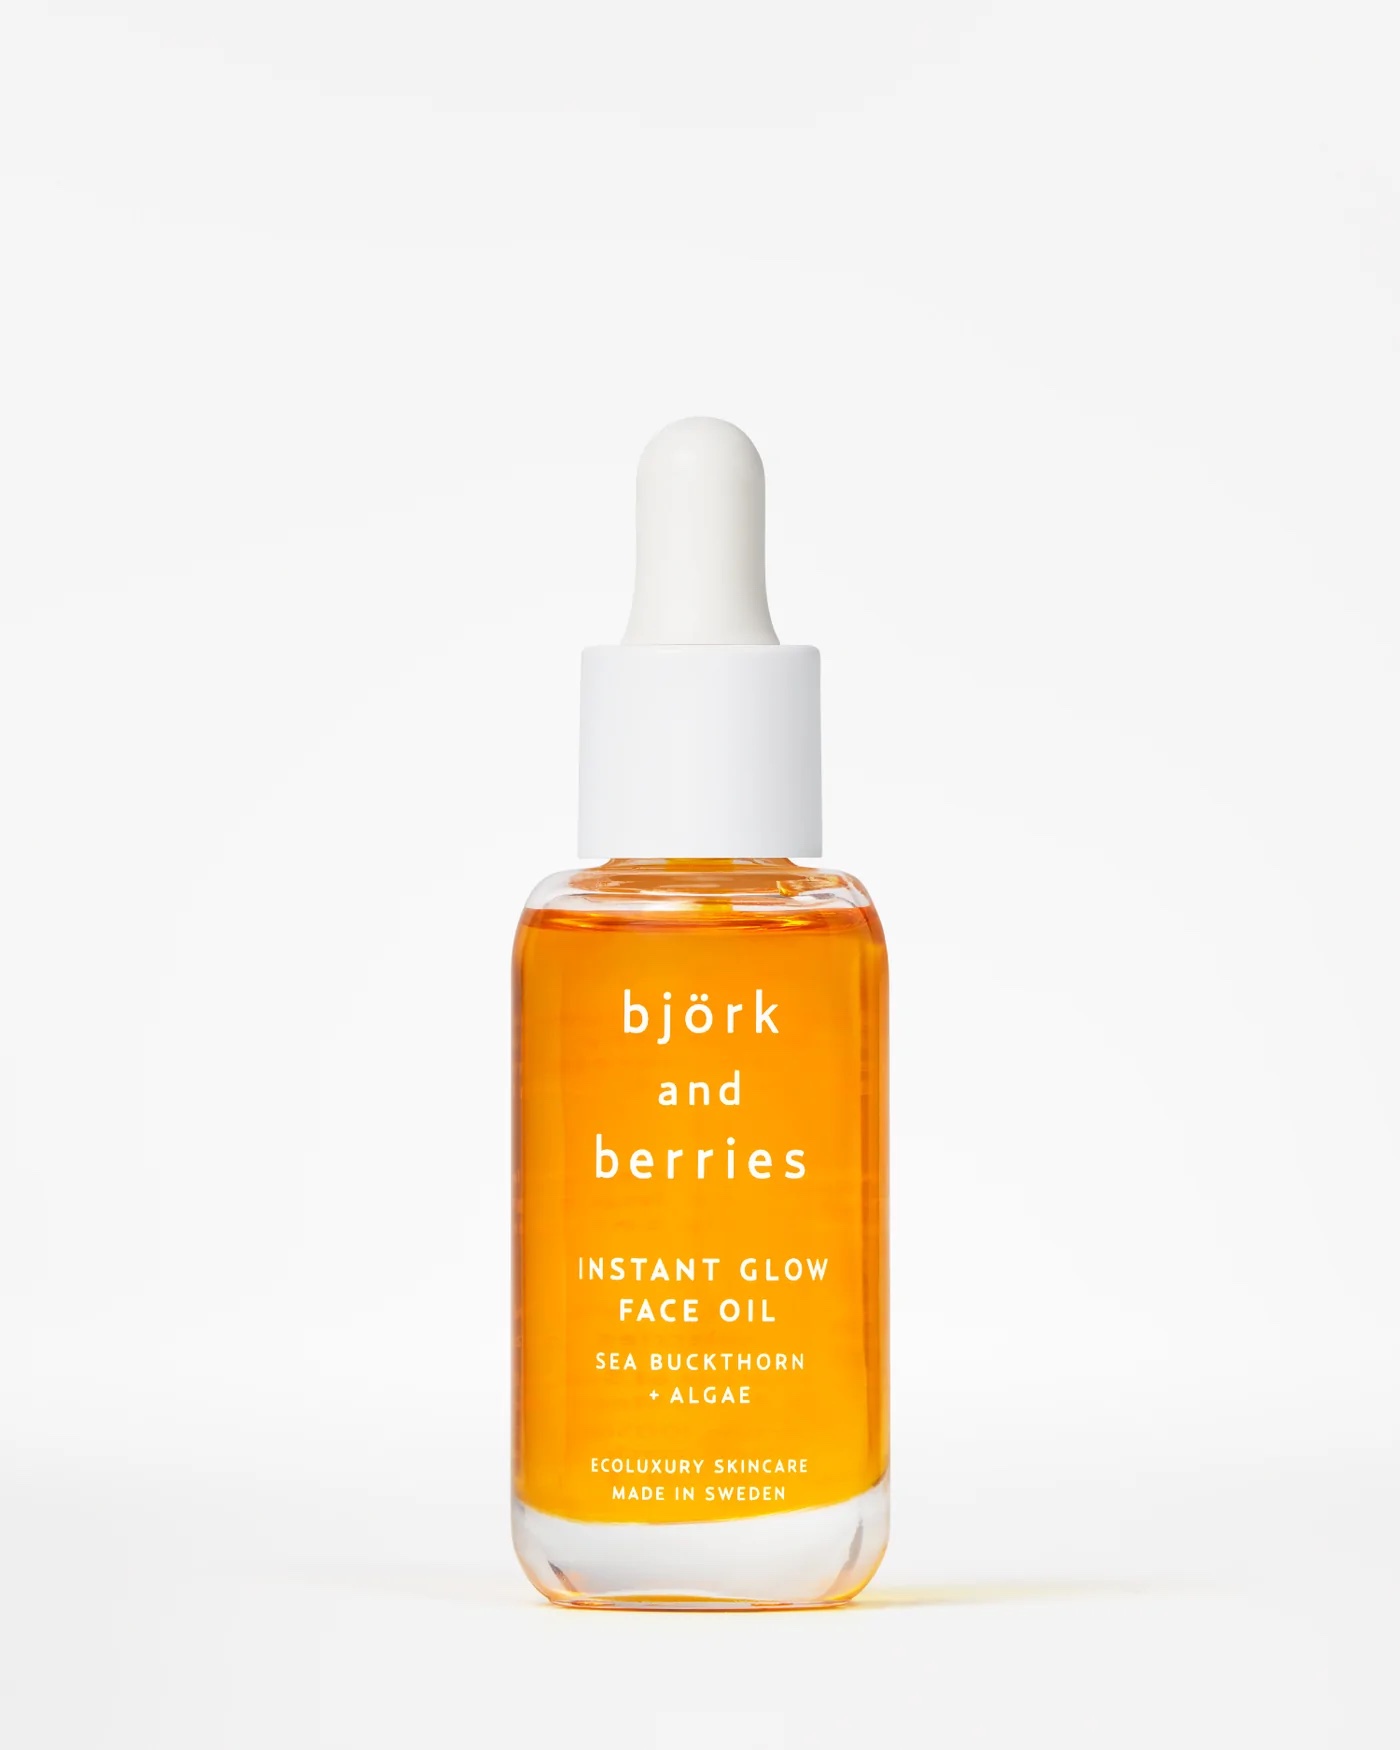 INSTANT GLOW FACE OIL 30ml